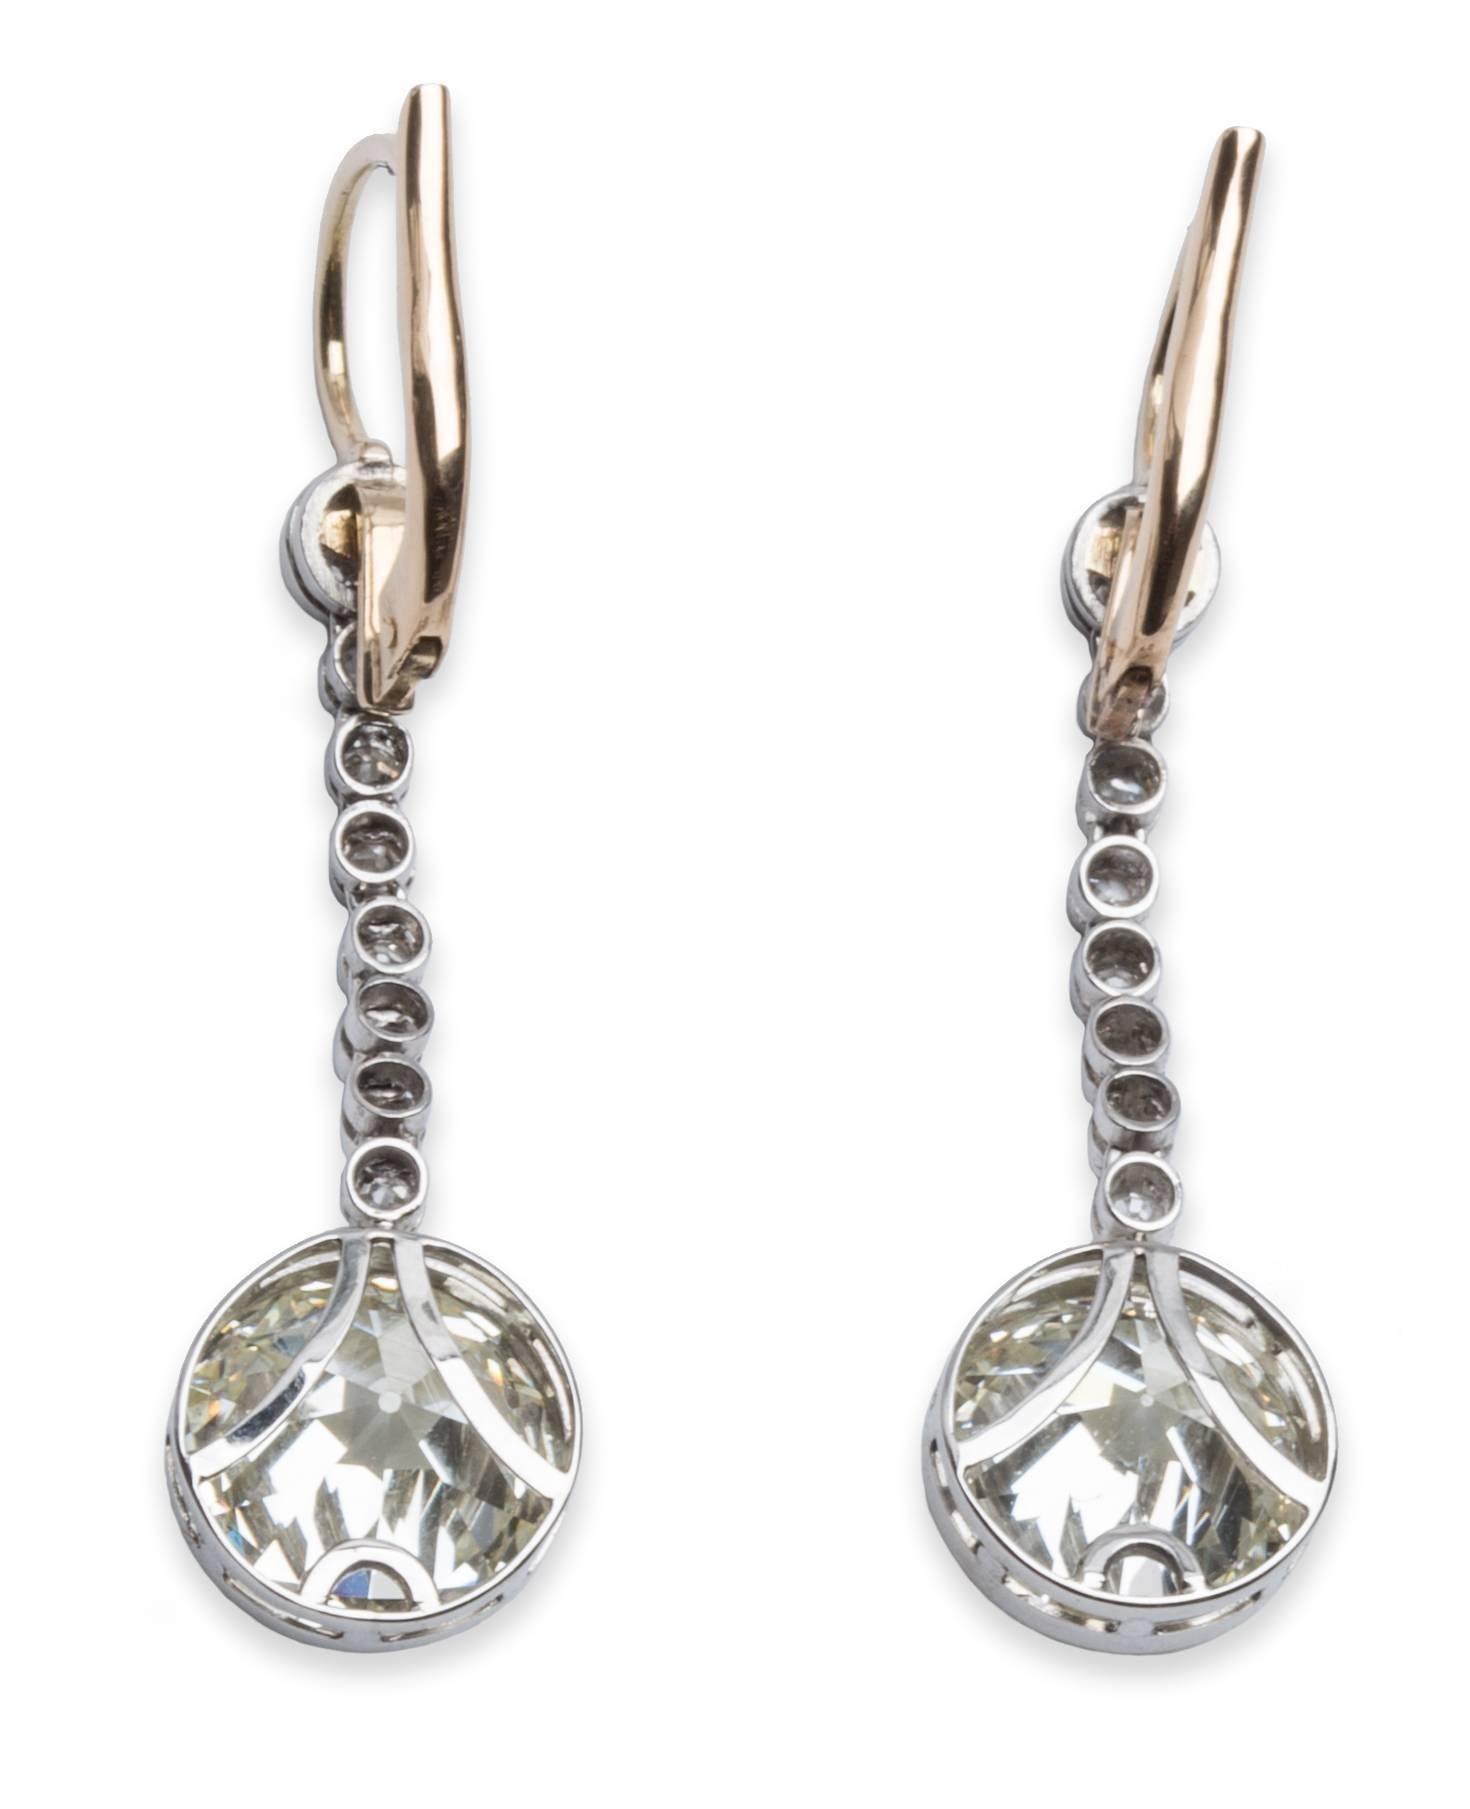 Old European Cut Diamond Earrings in 18K Rose Gold and Platinum. 5.90 carat Total Diamond Weight for both main diamonds, each stone is approximately 2.95 carat. The Earrings are 1.75 inches long.